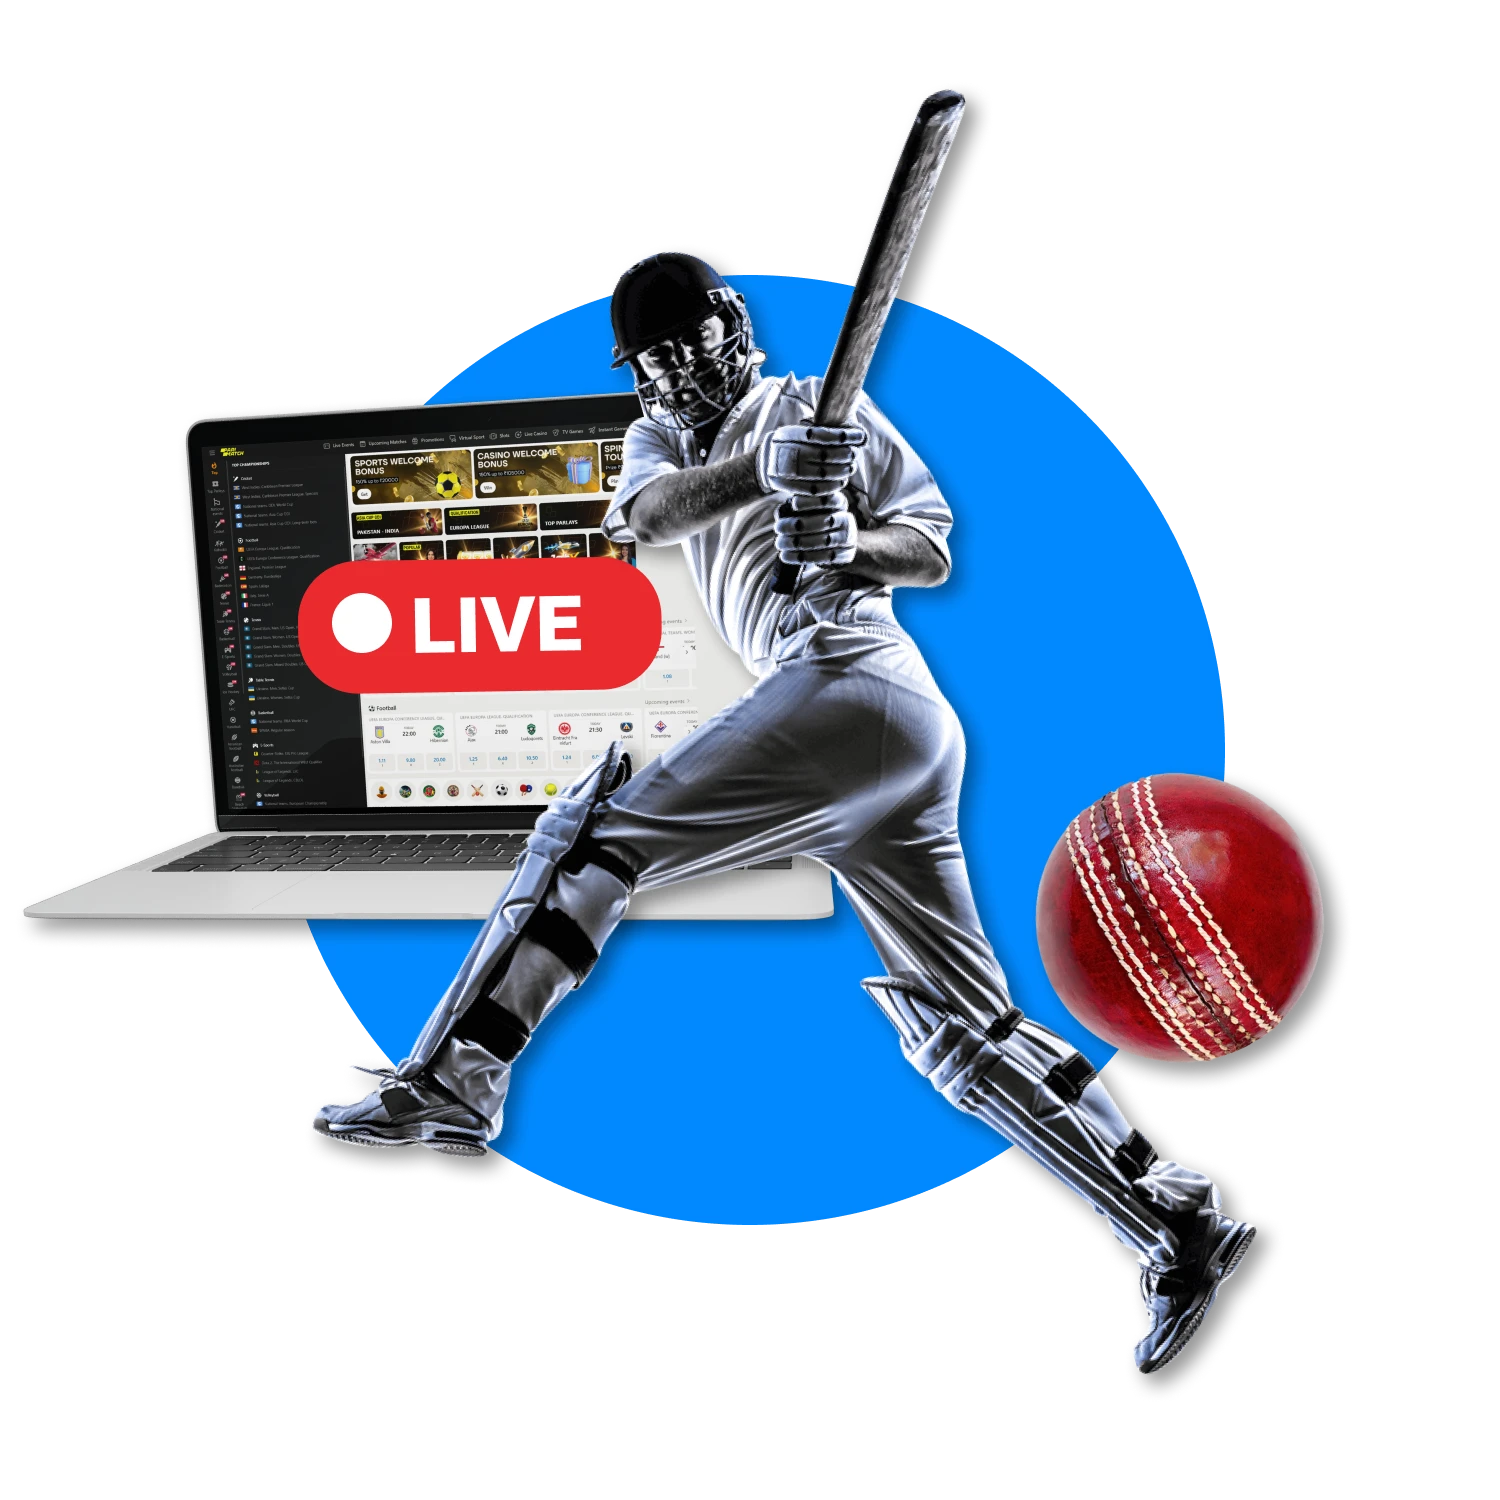 Use this guide to find out where to watch live streaming of cricket matches.